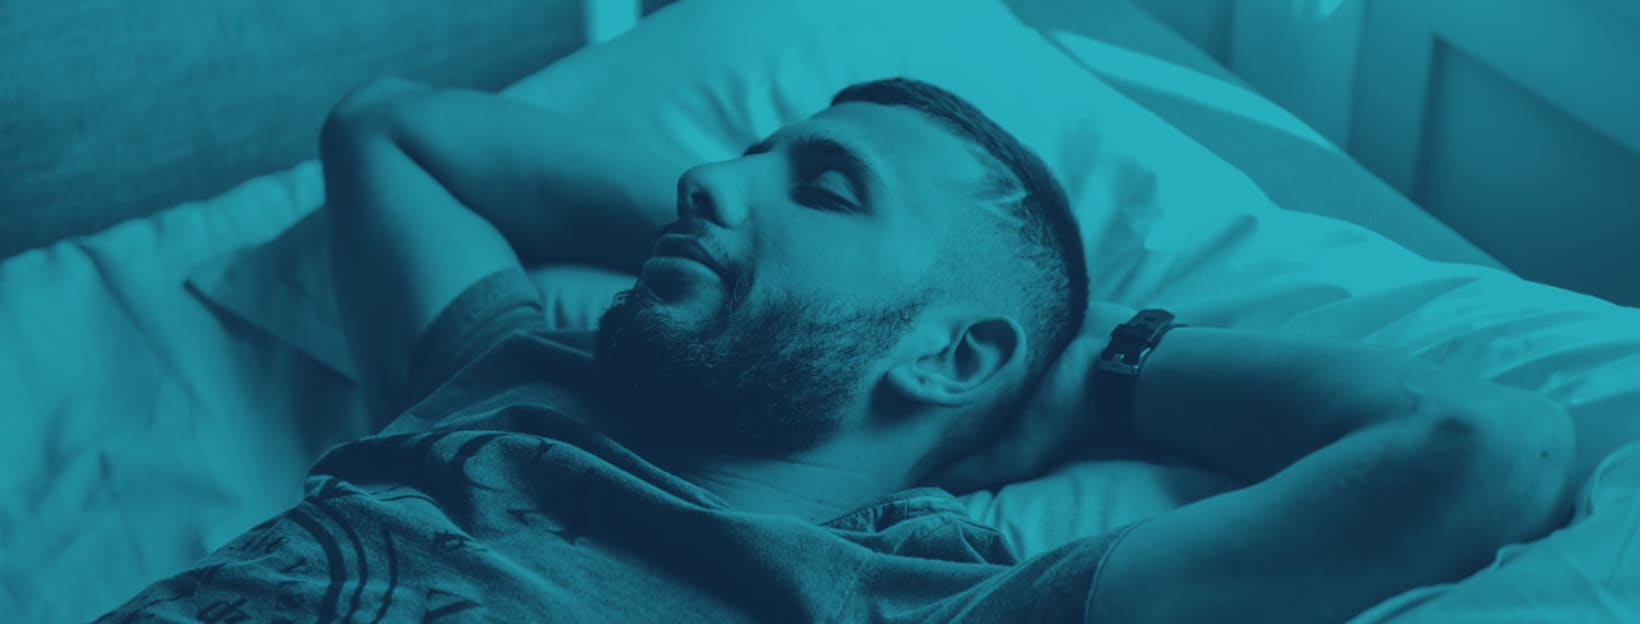 9 Best Sleep Trackers and Apps for Longevity in 2022